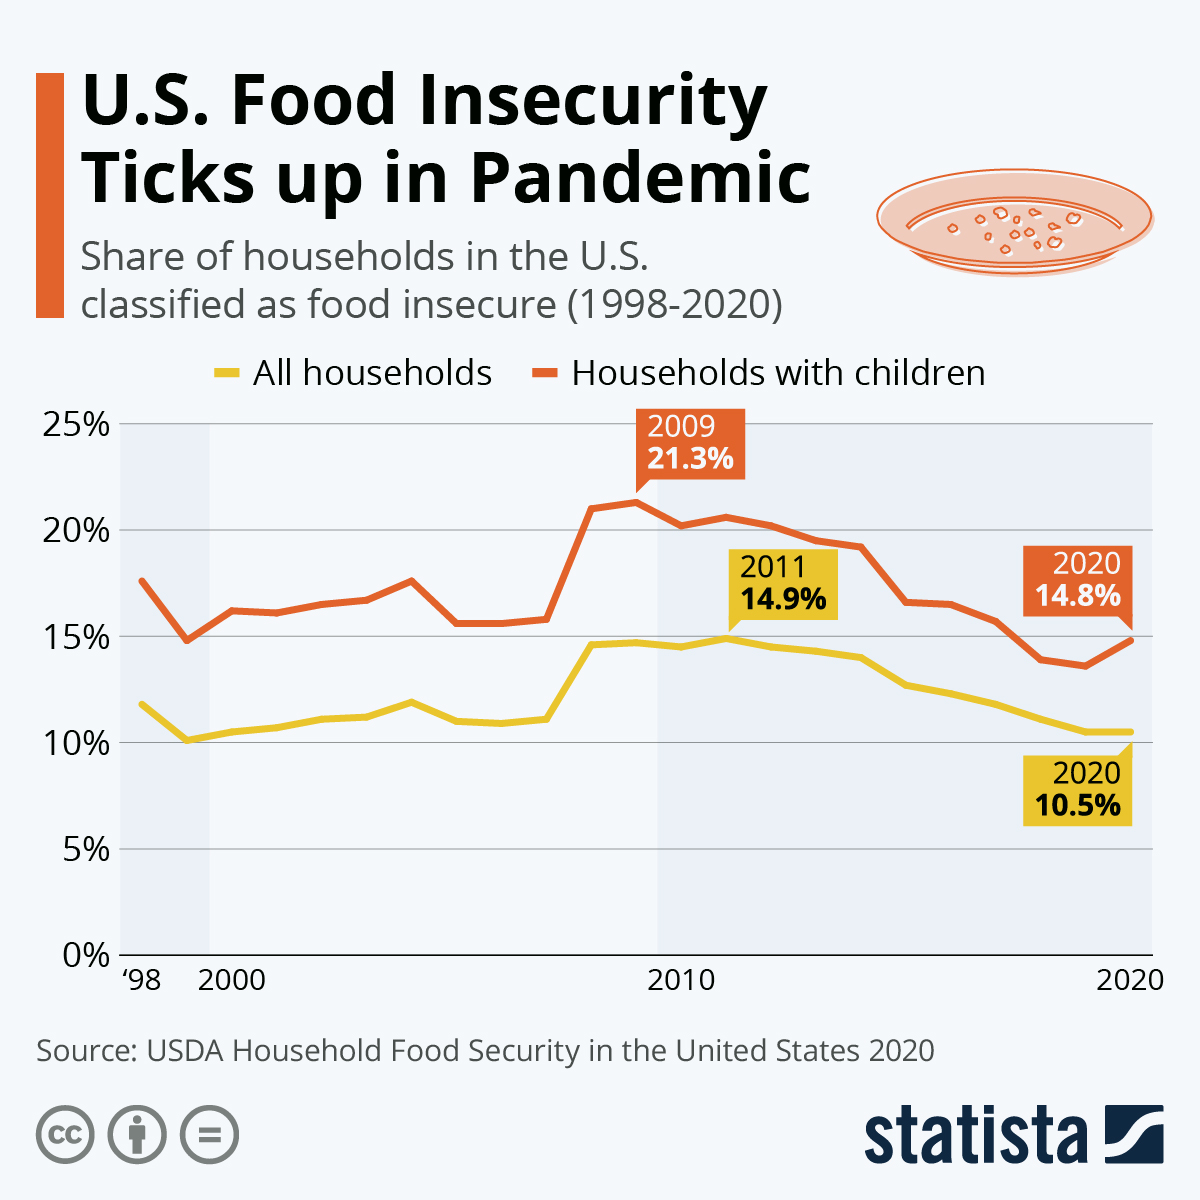 U.S. Food Insecurity Ticks up in Pandemic